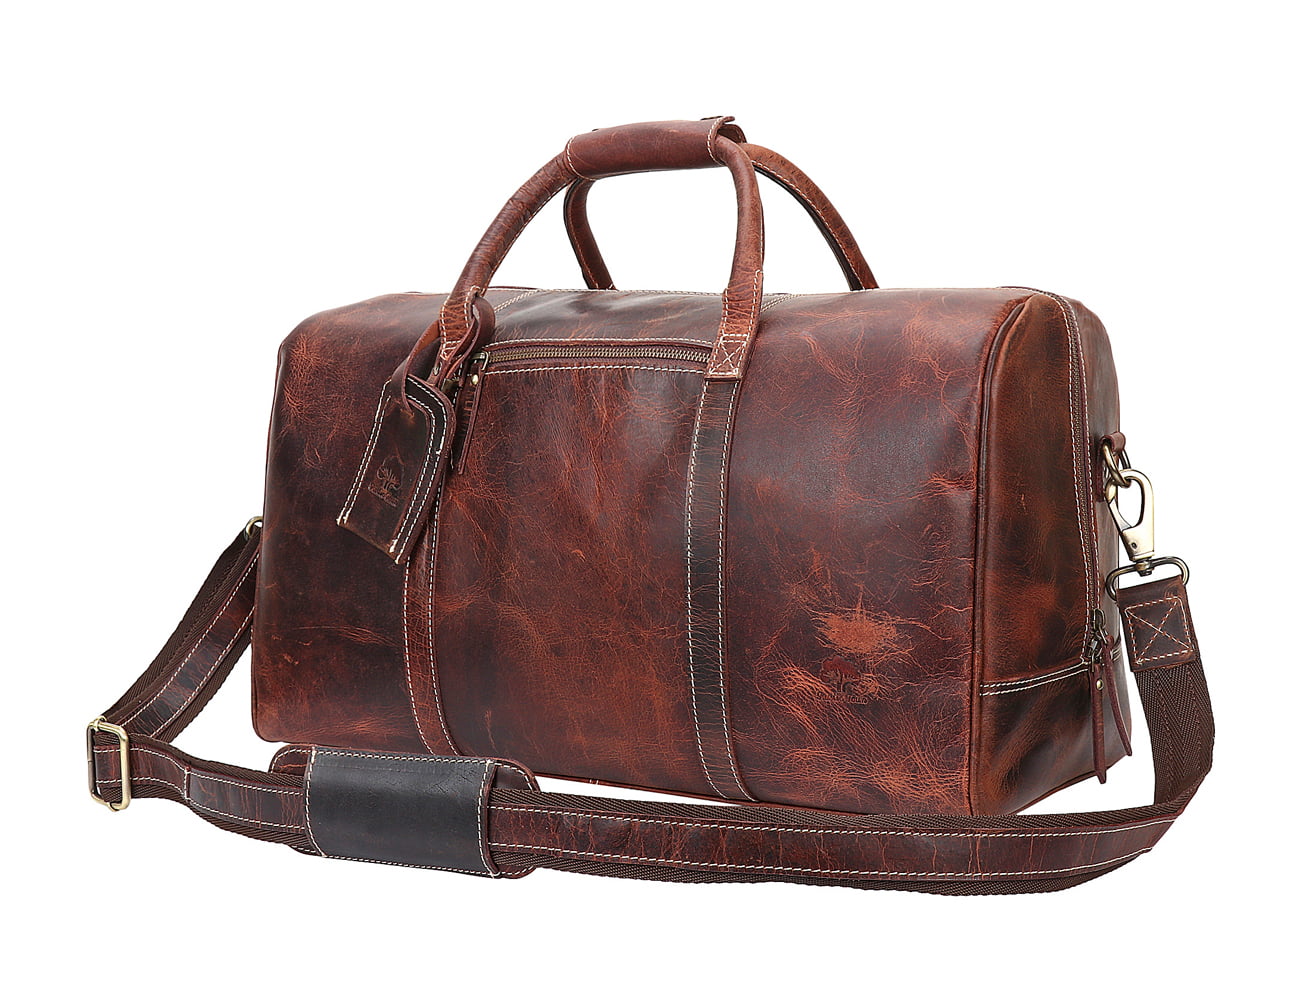 Rustic Town Genuine Leather Handmade Duffel Bag Airplane Carry On Luggage - 0